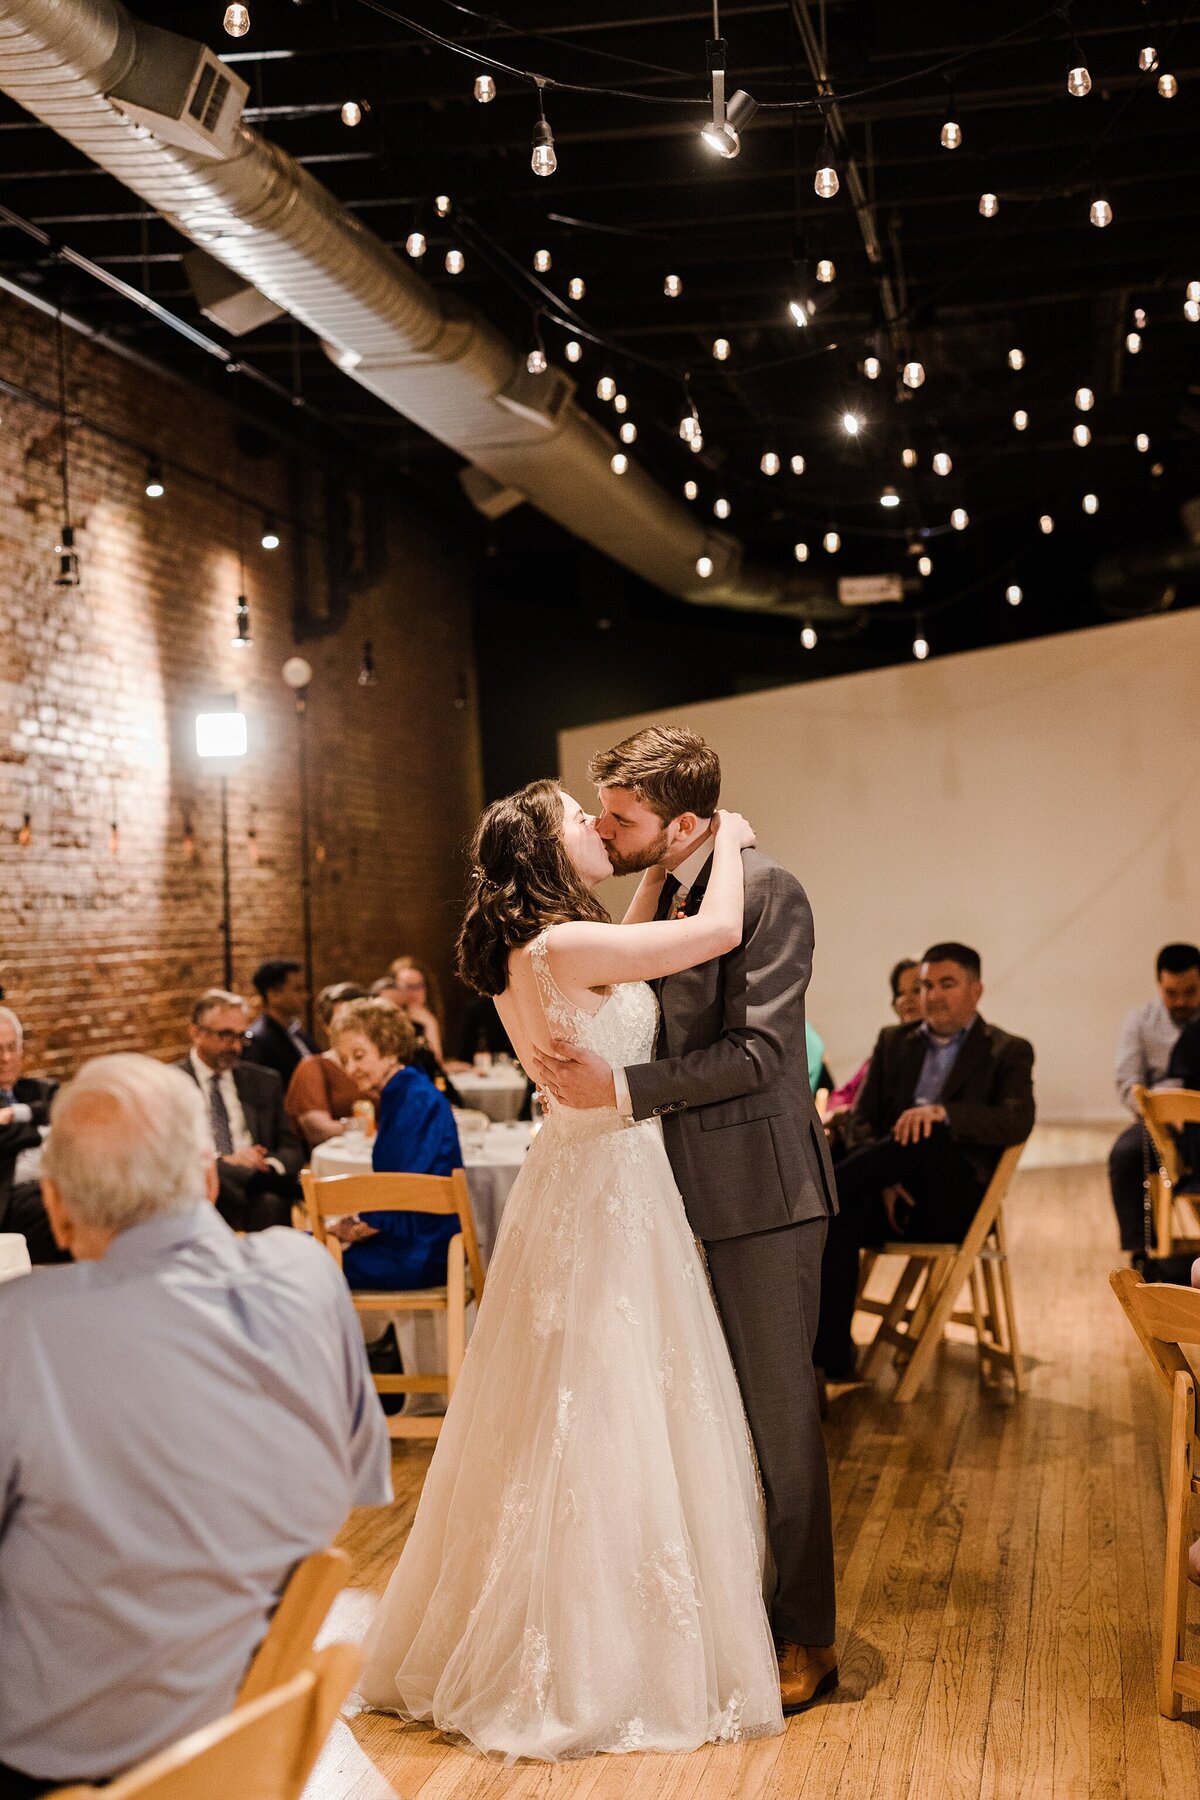 A bride and groom share a kiss during their first dance during their wedding reception in Plano, Texas. The bride is on the left and is wearing a long, flowing, intricate, white dress. The groom is on the right and is wearing a grey suit. Their guests watch on all around them from their reception tables.